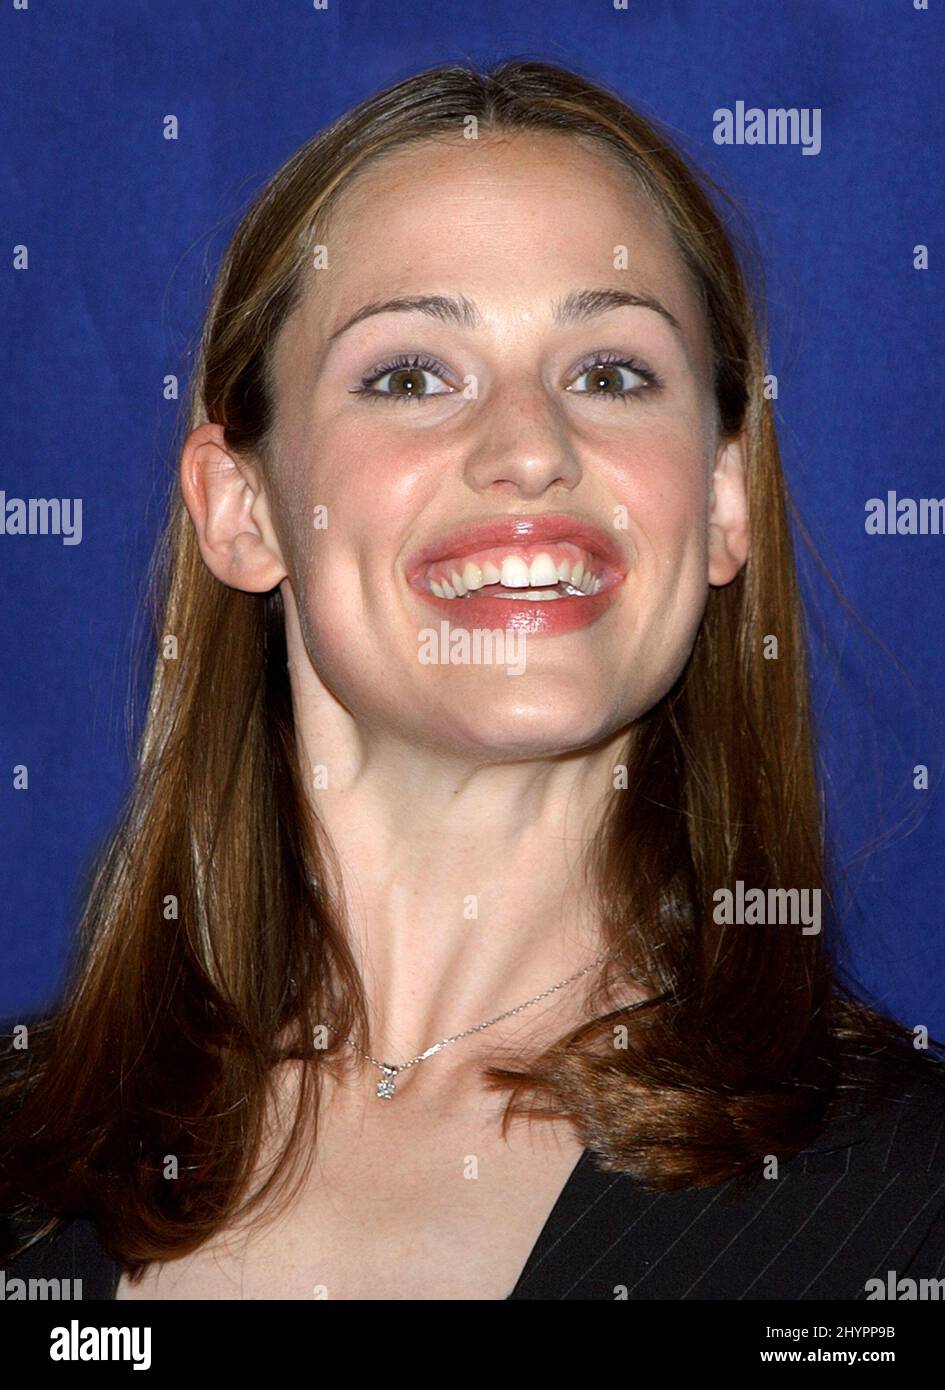 The William S. Paley Television Festival presents the 'Alias' Cast at the  DGA Theatre, Hollywood. Jennifer Garner attends. Picture: UK Press Stock  Photo - Alamy